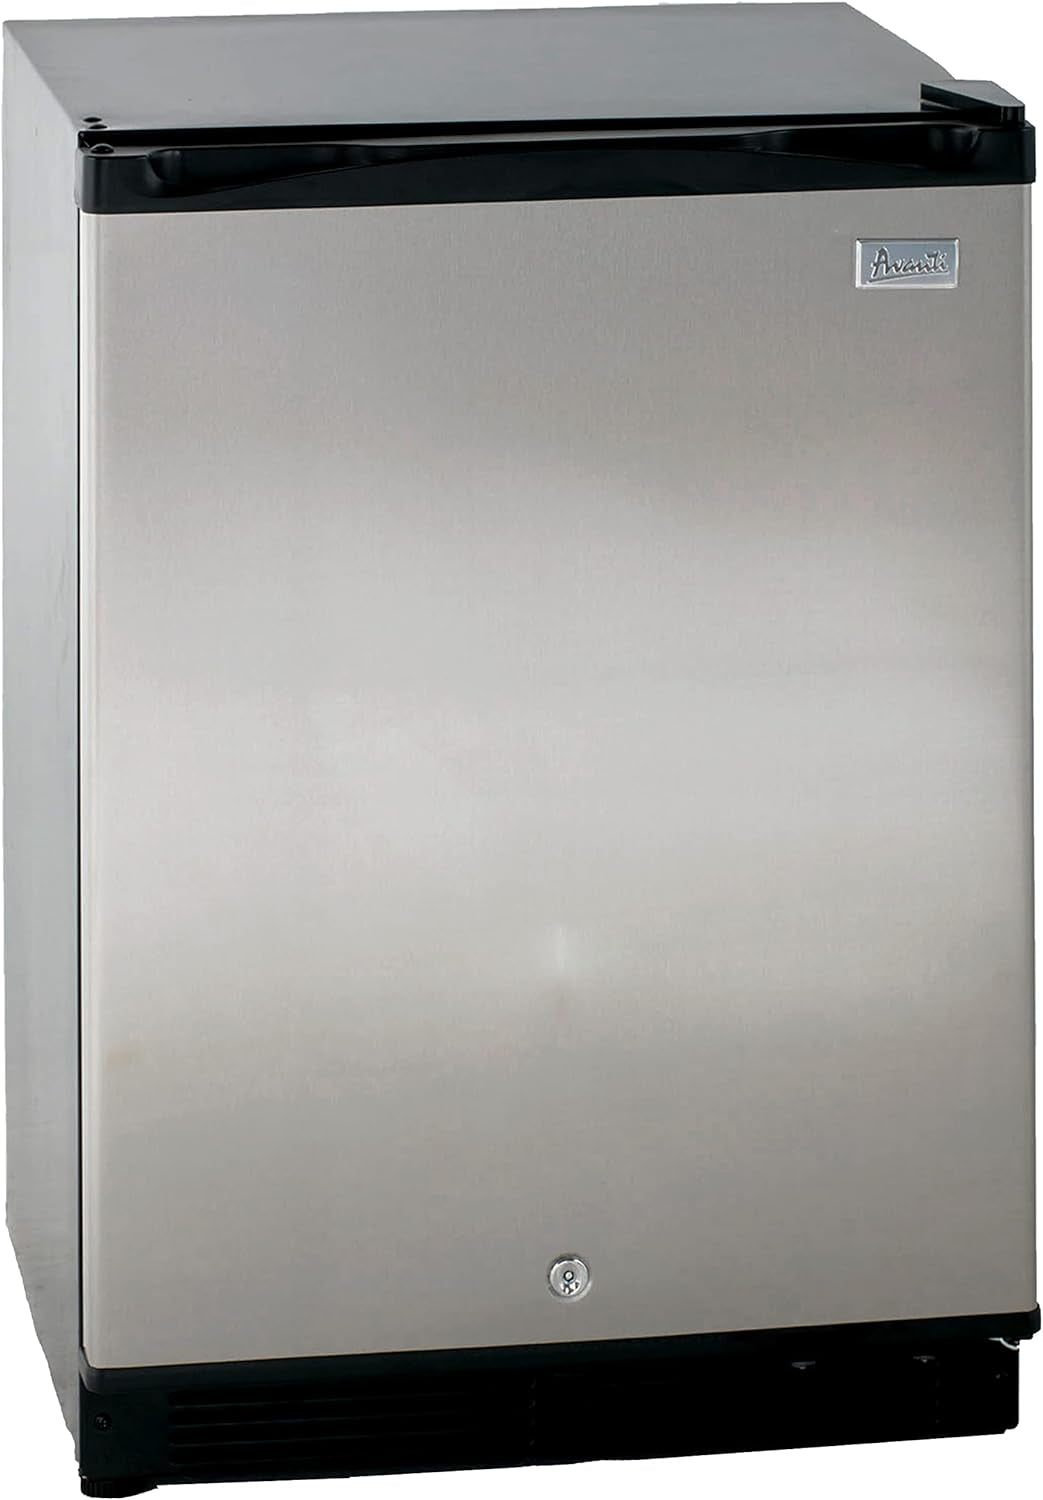 Offer For AR52T3SB Mini Fridge Compact Refrigerator for Home Office or Dorm, Auto Defrost with Reversible Door, Energy Star Rated, Black MowerShop